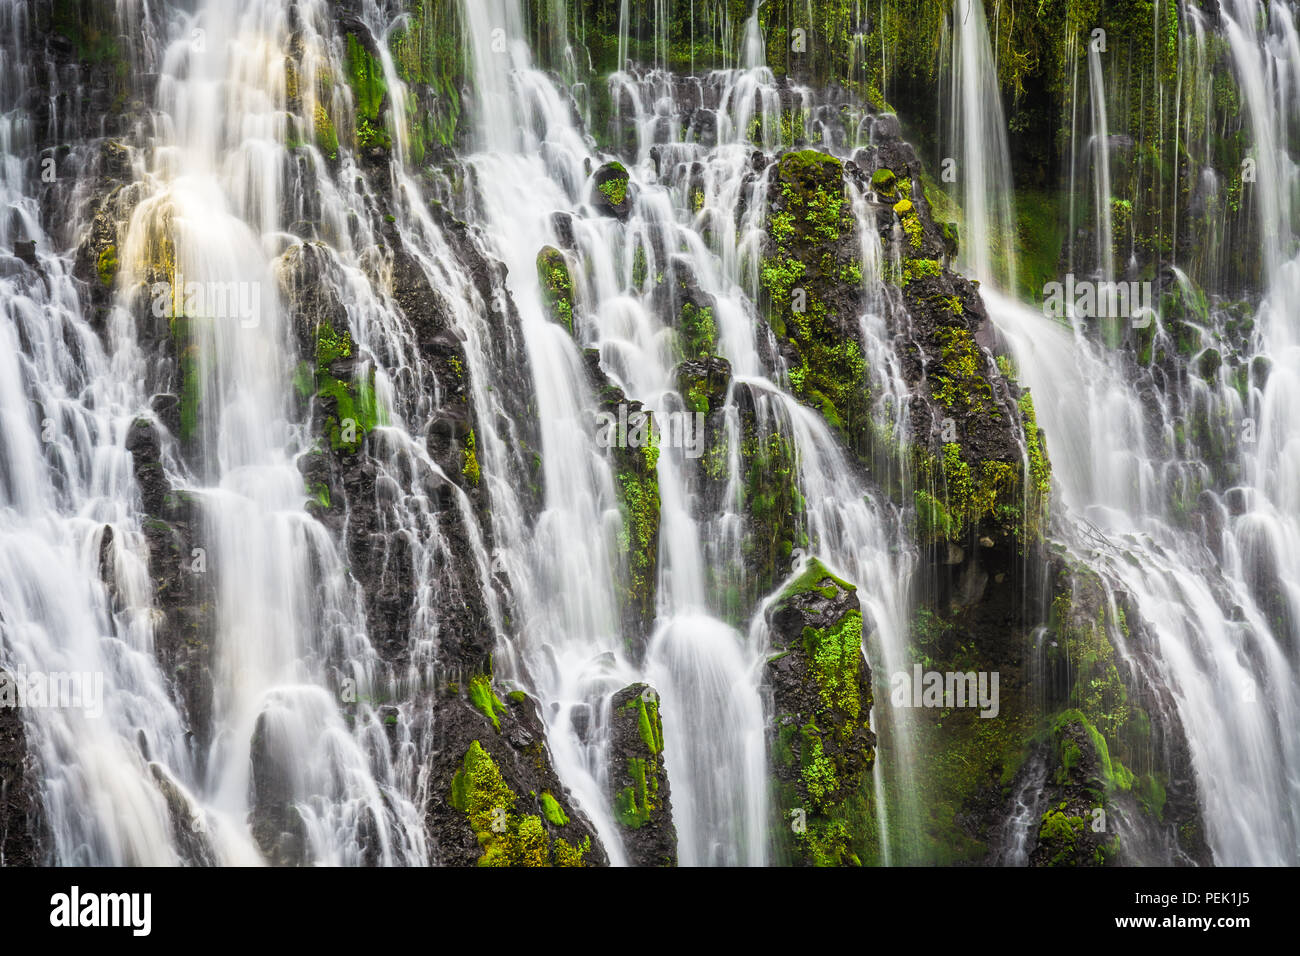 Water cascades down the side of a rocky cliff at McArthur Burney Falls just outside of Burney, California. Stock Photo